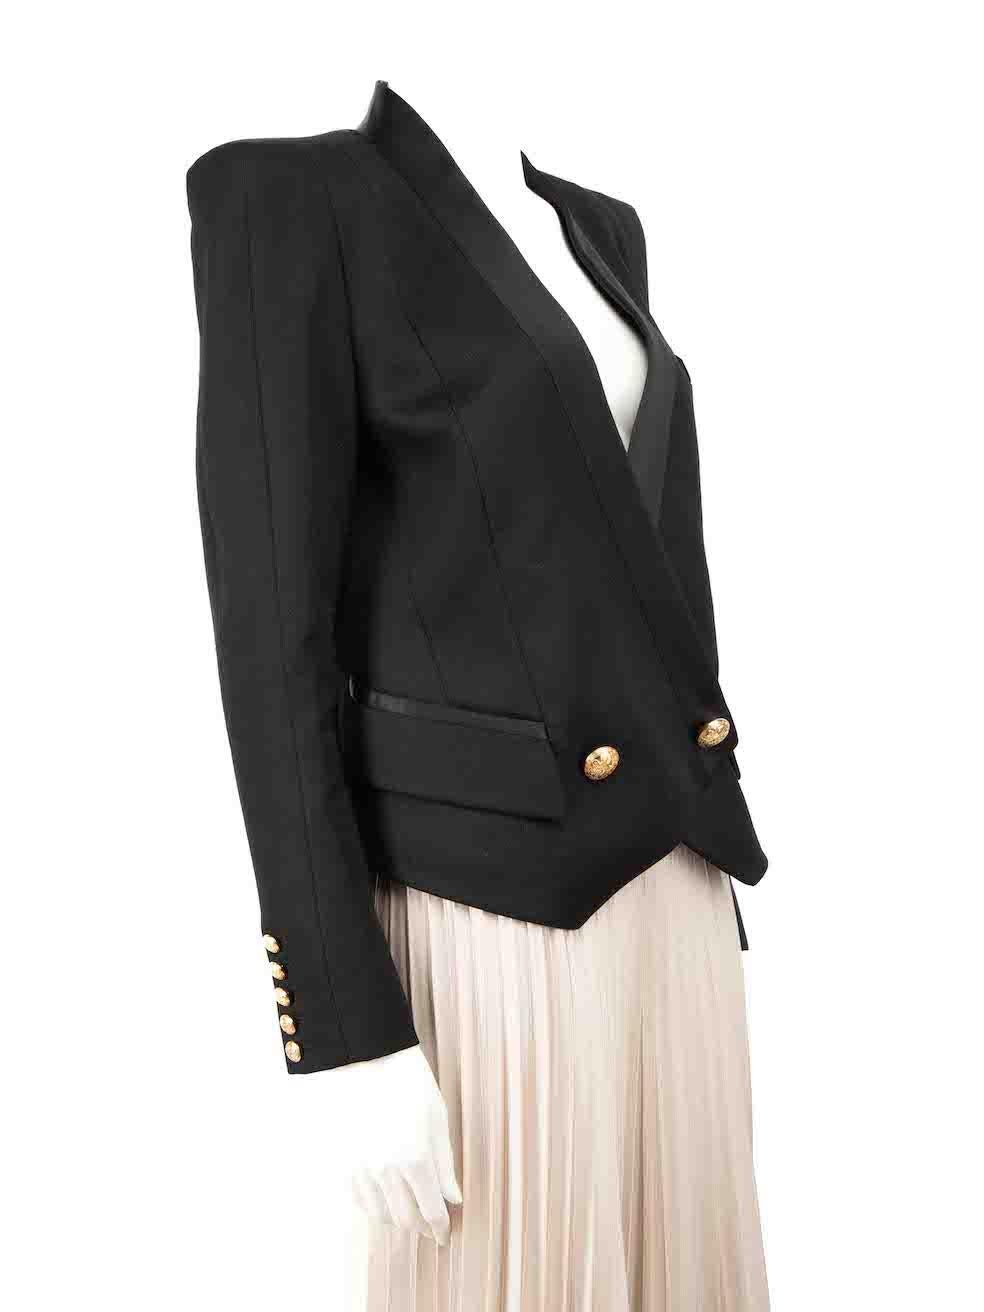 CONDITION is Very good. Minimal wear to blazer is evident. Minimal wear to the satin lapels with light plucking to the left on this used Balmain designer resale item.
 
 
 
 Details
 
 
 Black
 
 Wool
 
 Blazer
 
 Cropped length
 
 Double breasted
